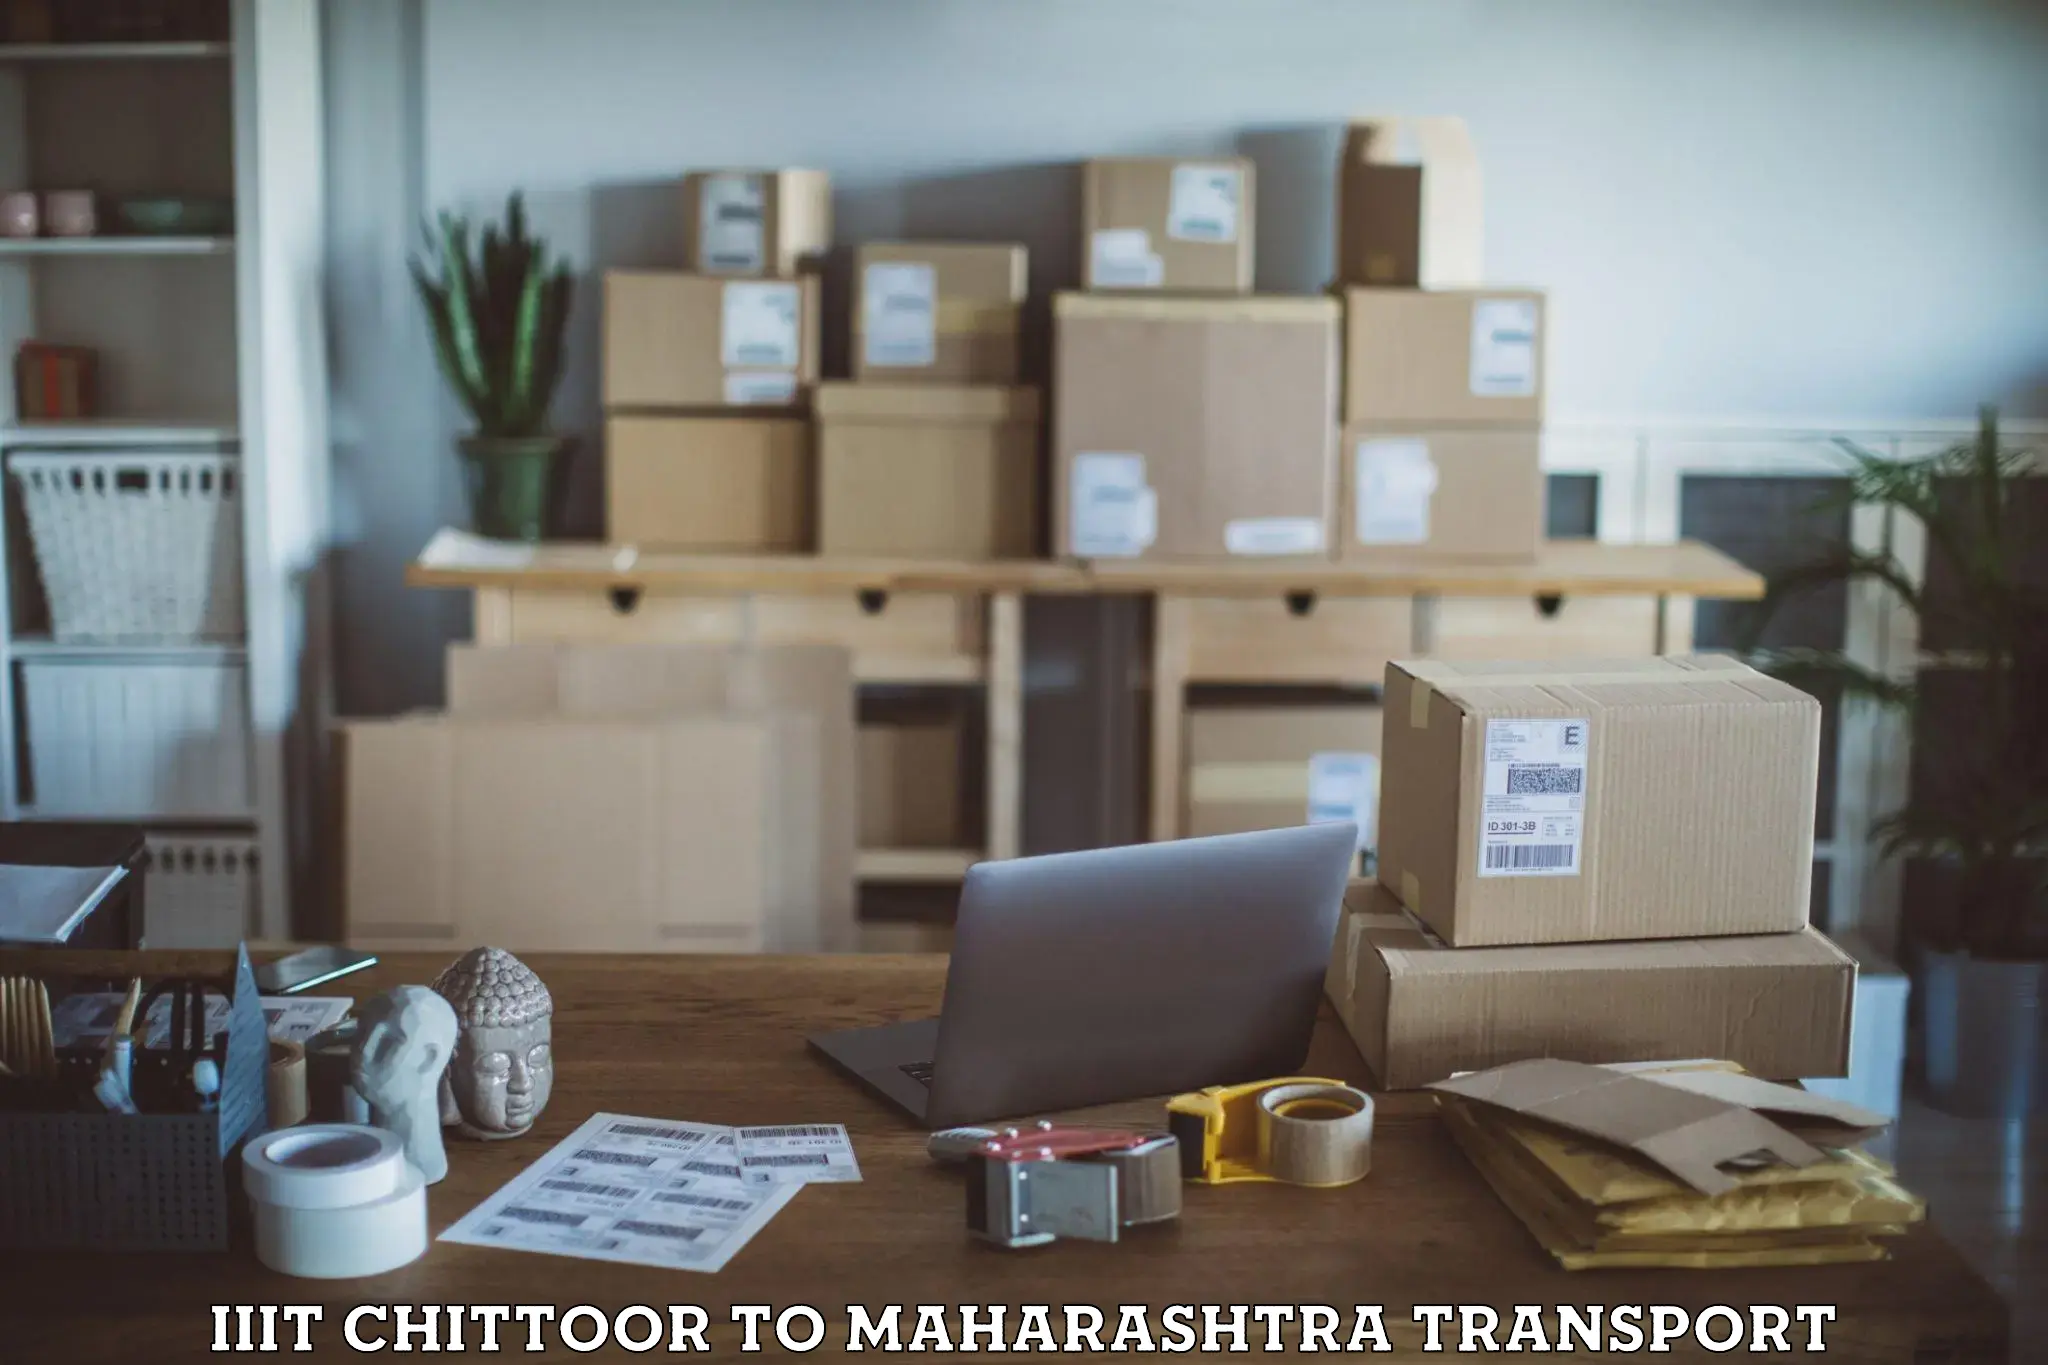 Container transport service IIIT Chittoor to Maharashtra